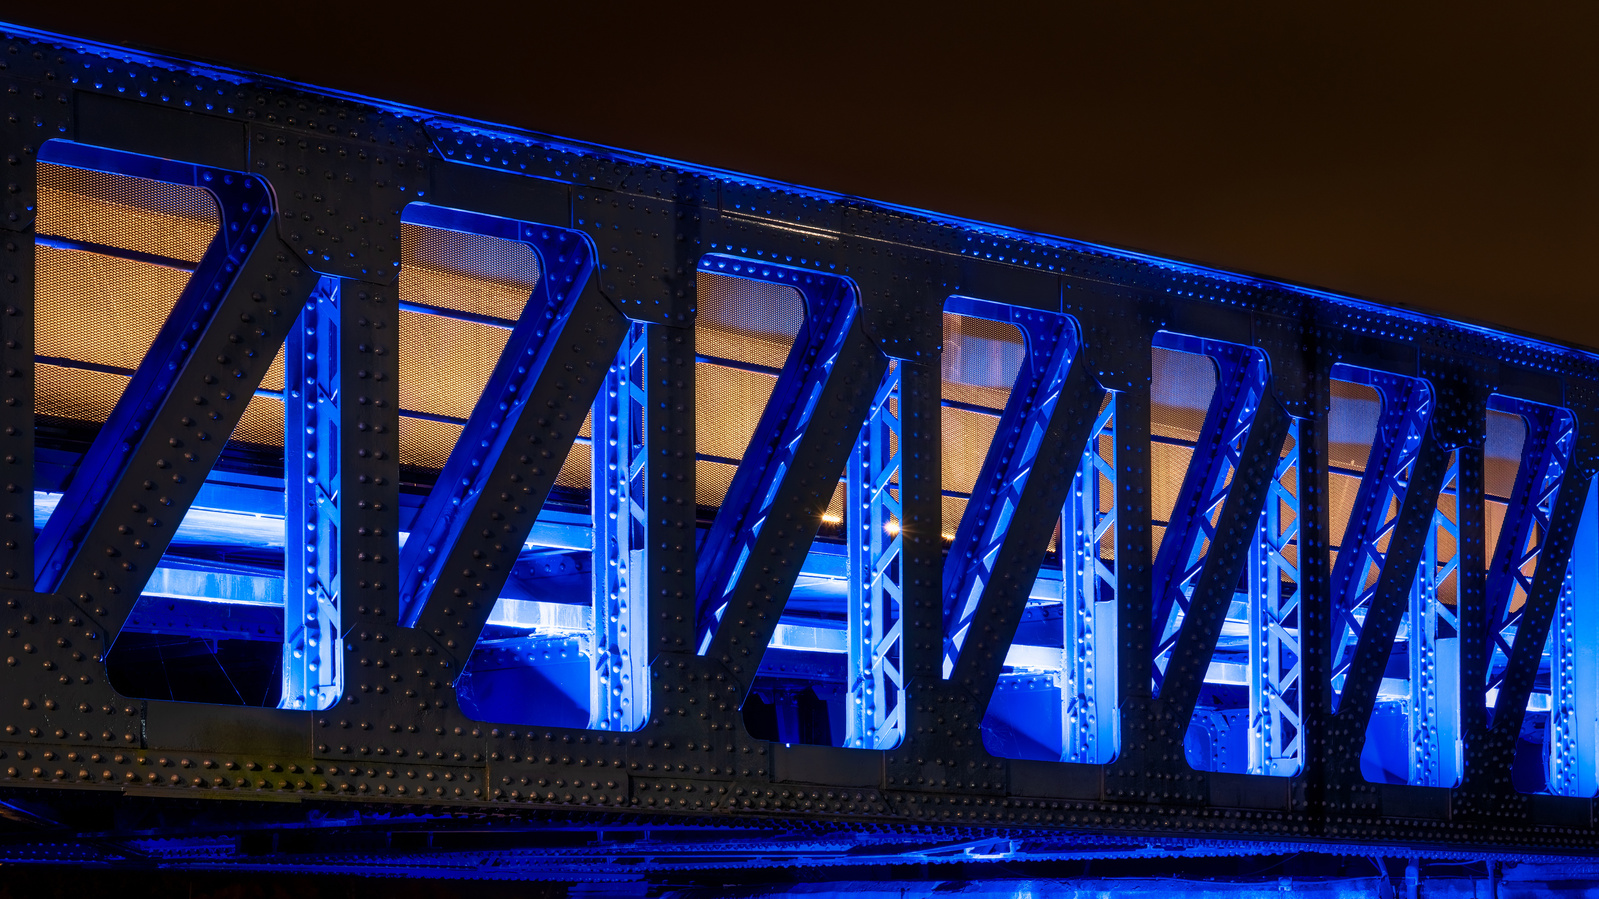 Exterior Bridge Lighting at night for SSUK Scotland Architecture in Glasgow - Photography by Nate Cleary